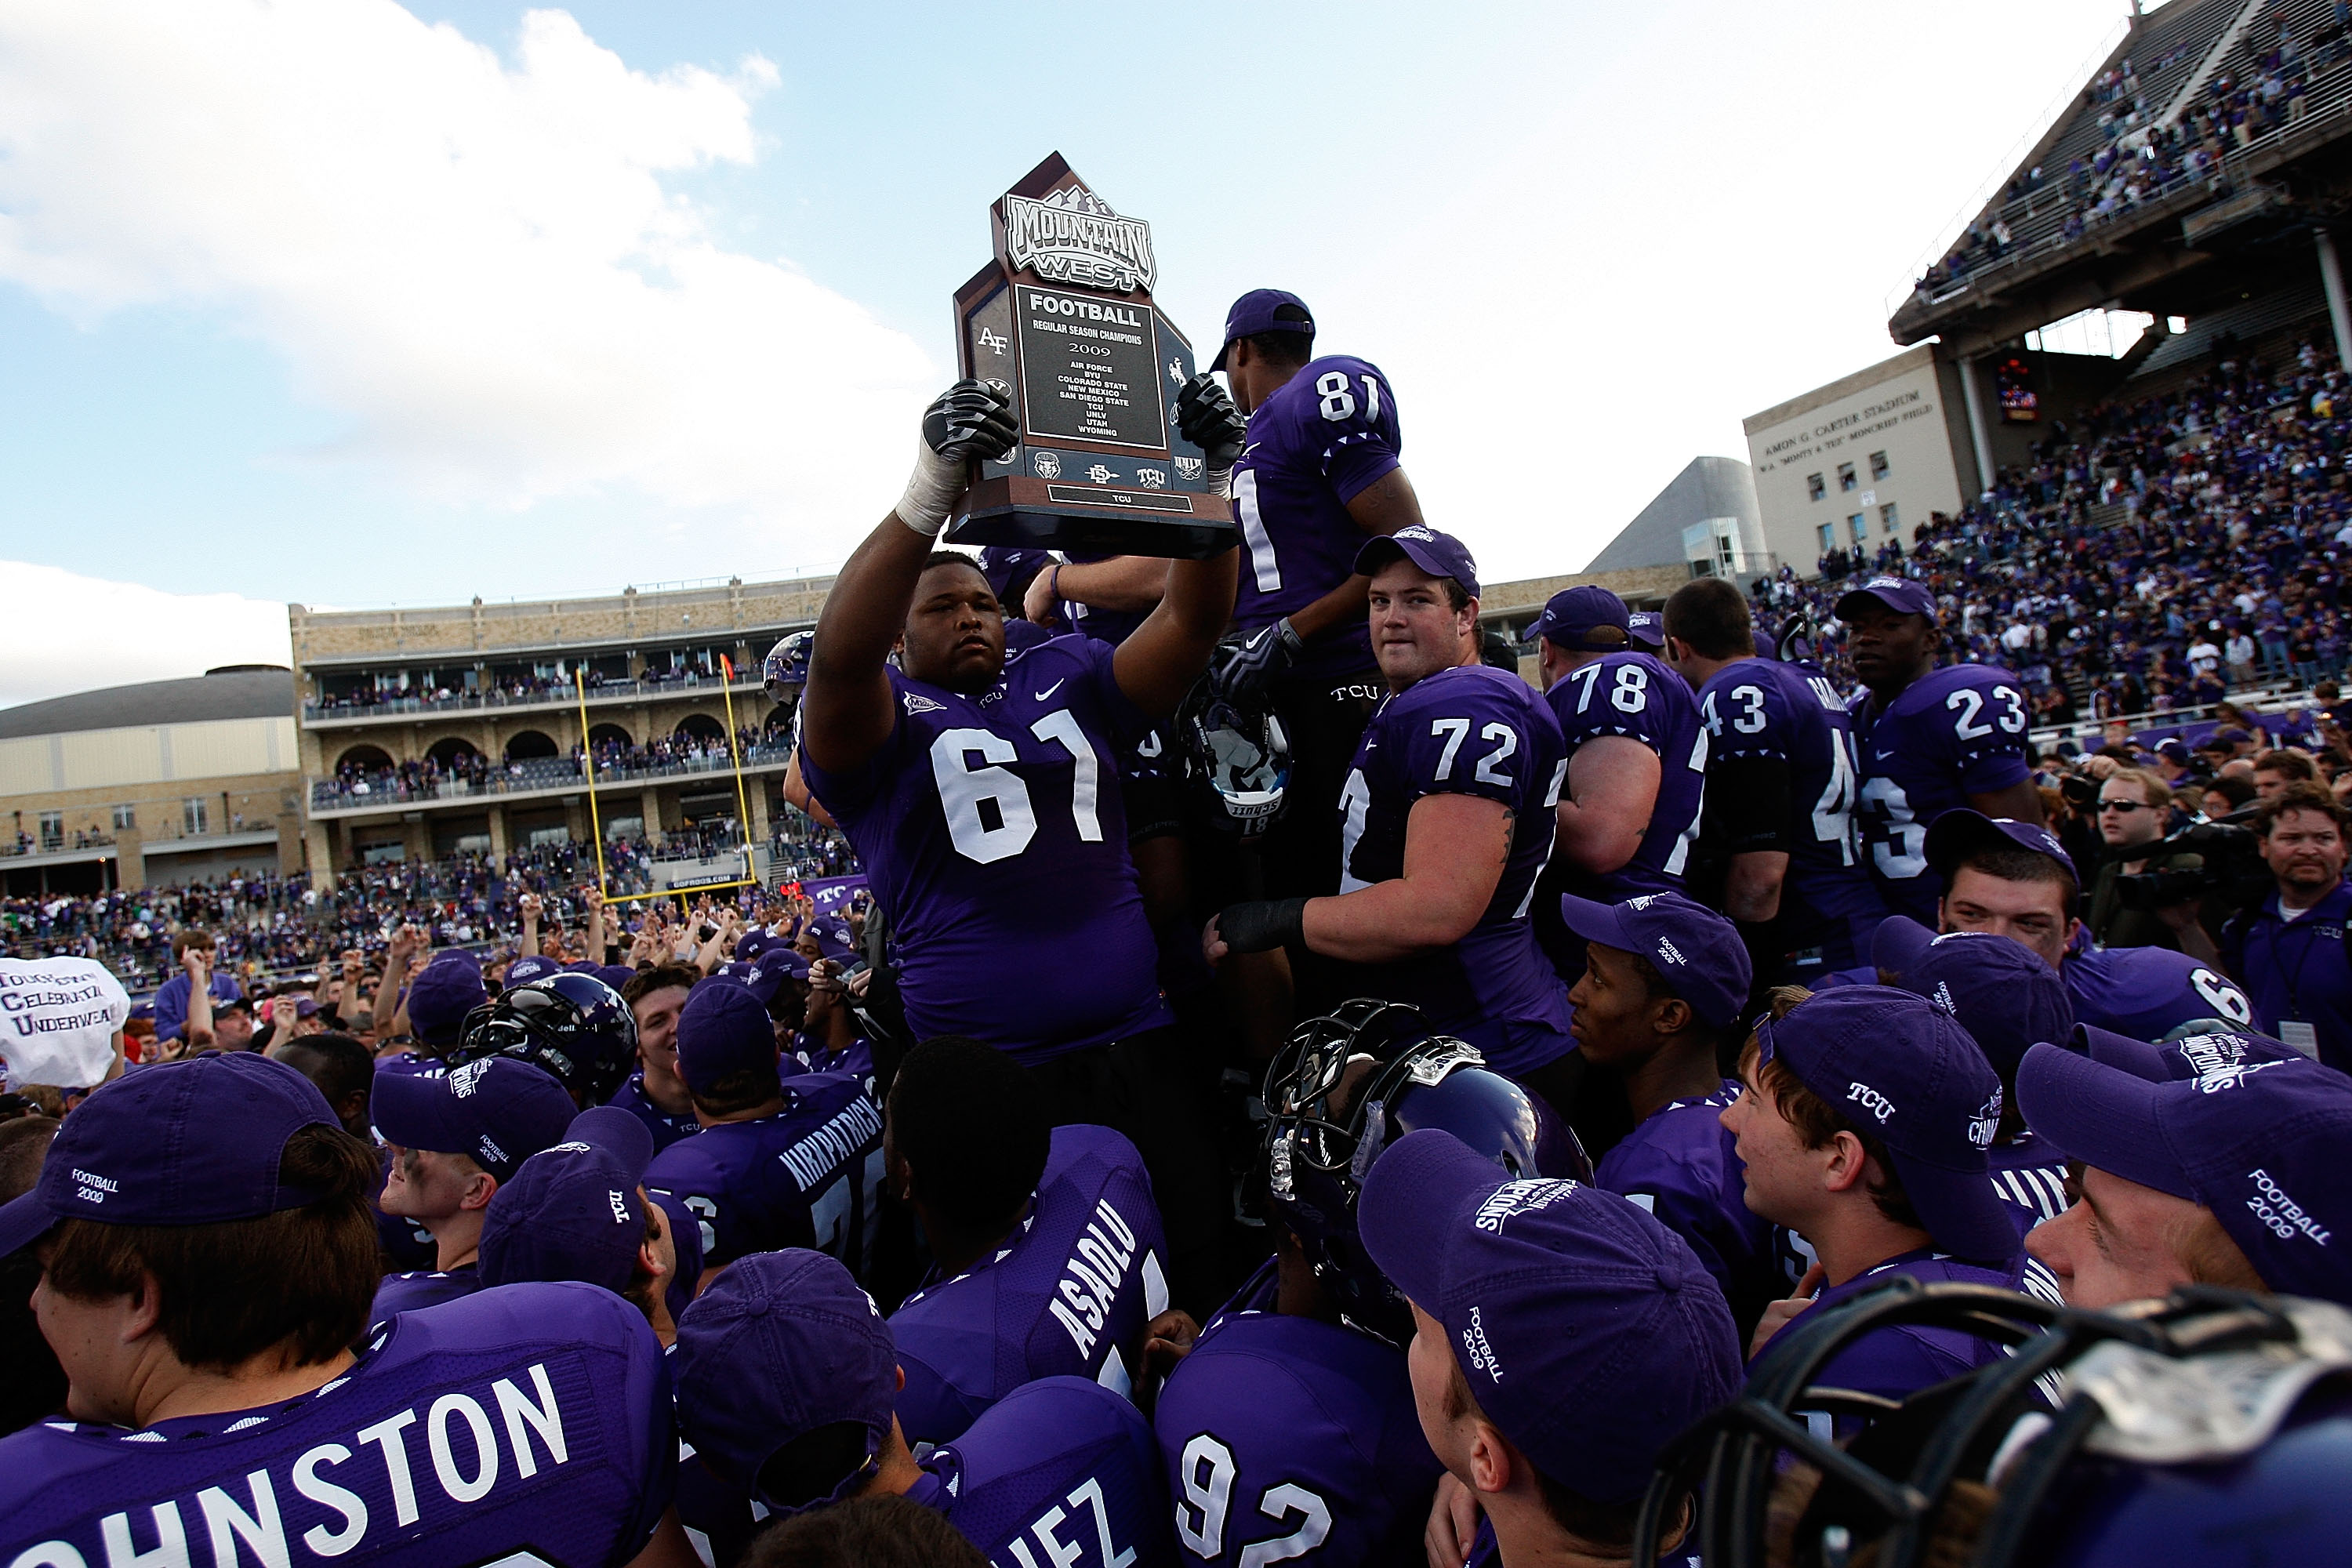 FORT WORTH, TX - NOVEMBER 28:  Marcus Cannon #61, Kyle Dooley #72 and Alonzo Adams #81 of the TCU Horned Frogs raise the Mountain West Regular Season Championship trophy at Amon G. Carter Stadium on November 28, 2009 in Fort Worth, Texas.  (Photo by Ronal